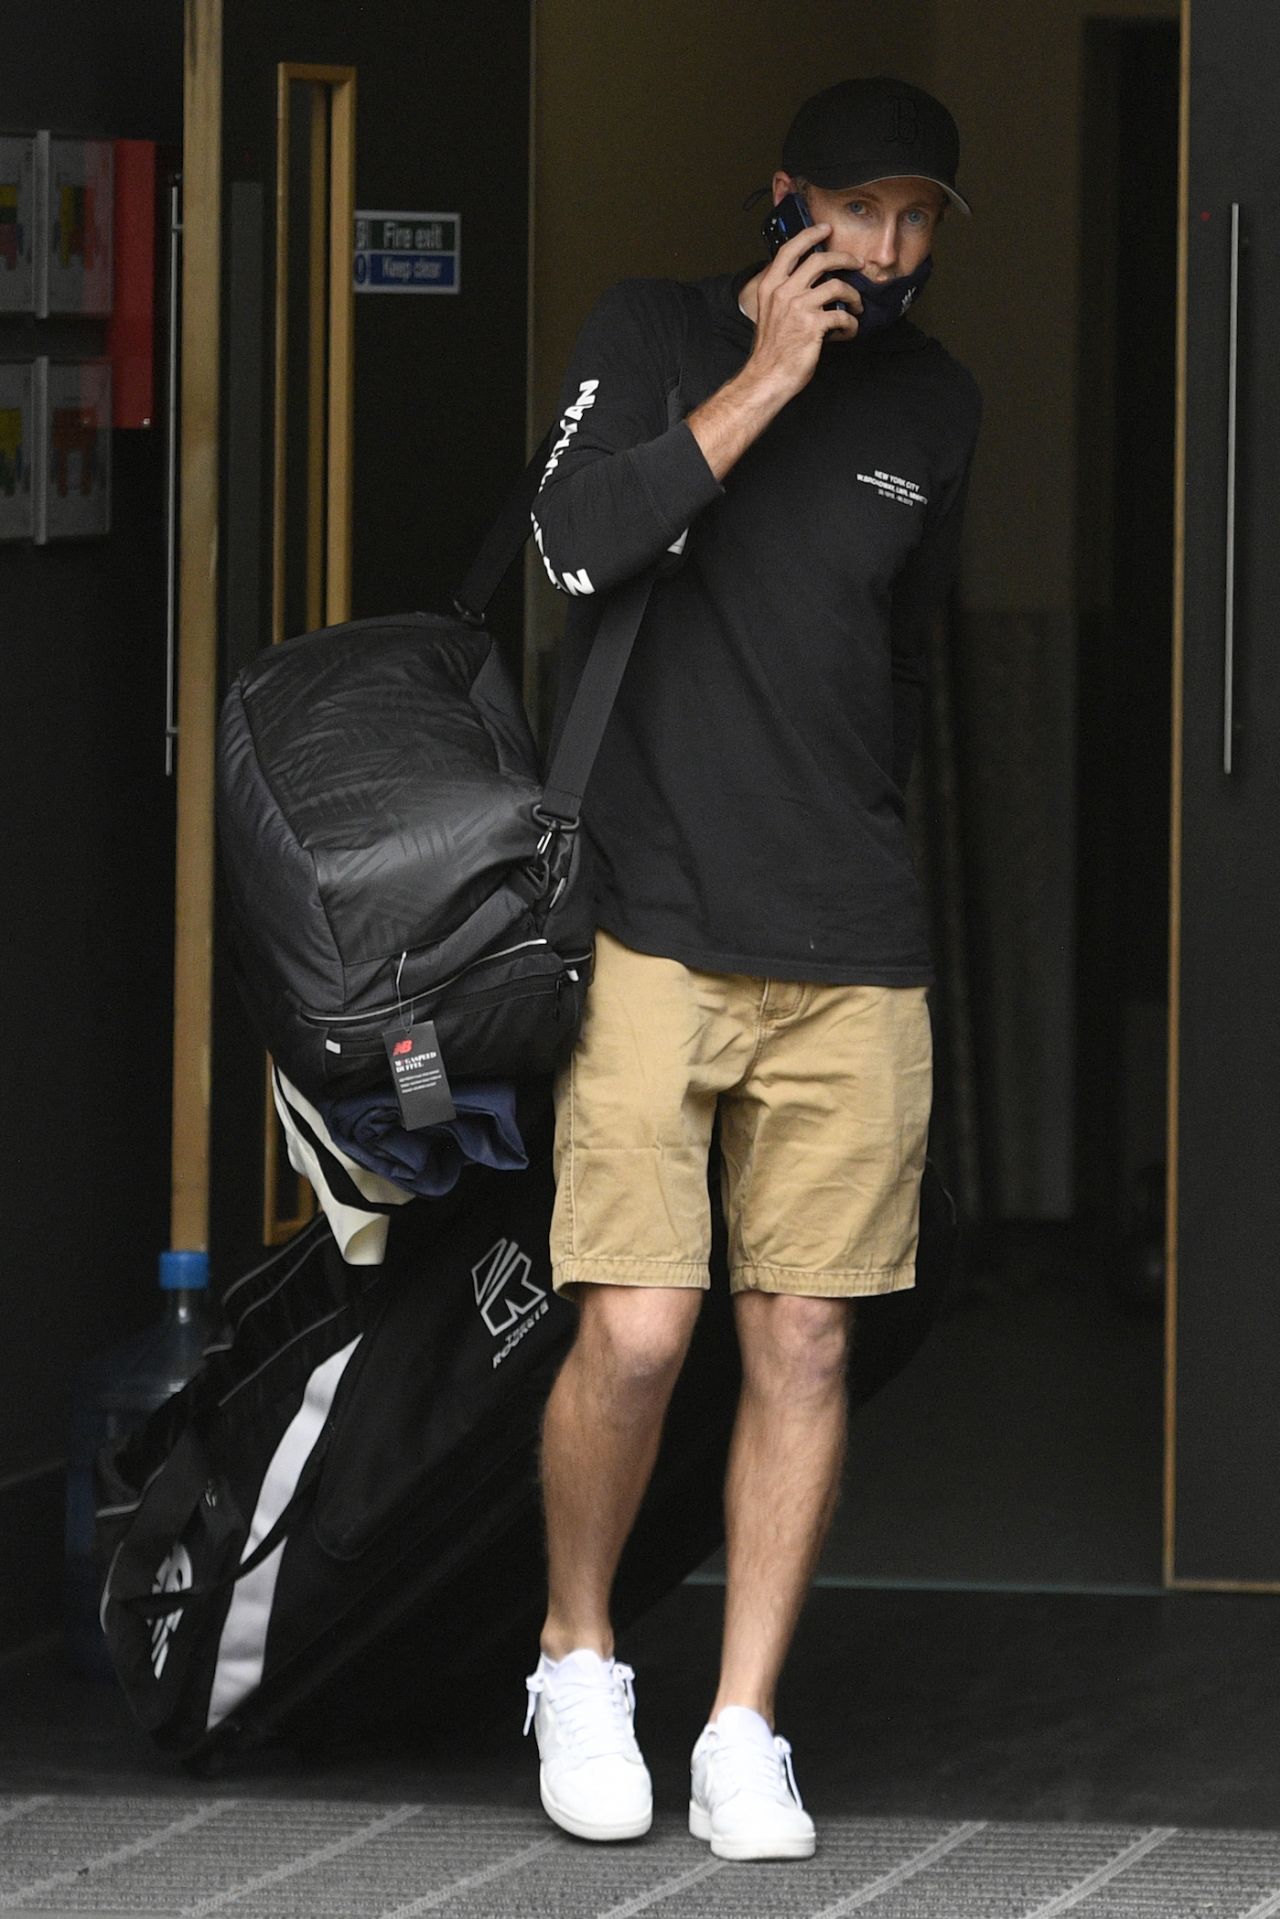 Joe Root talks on the phone as he leaves Old Trafford, England vs India, 5th Test, Manchester, 1st day, September 10, 2021